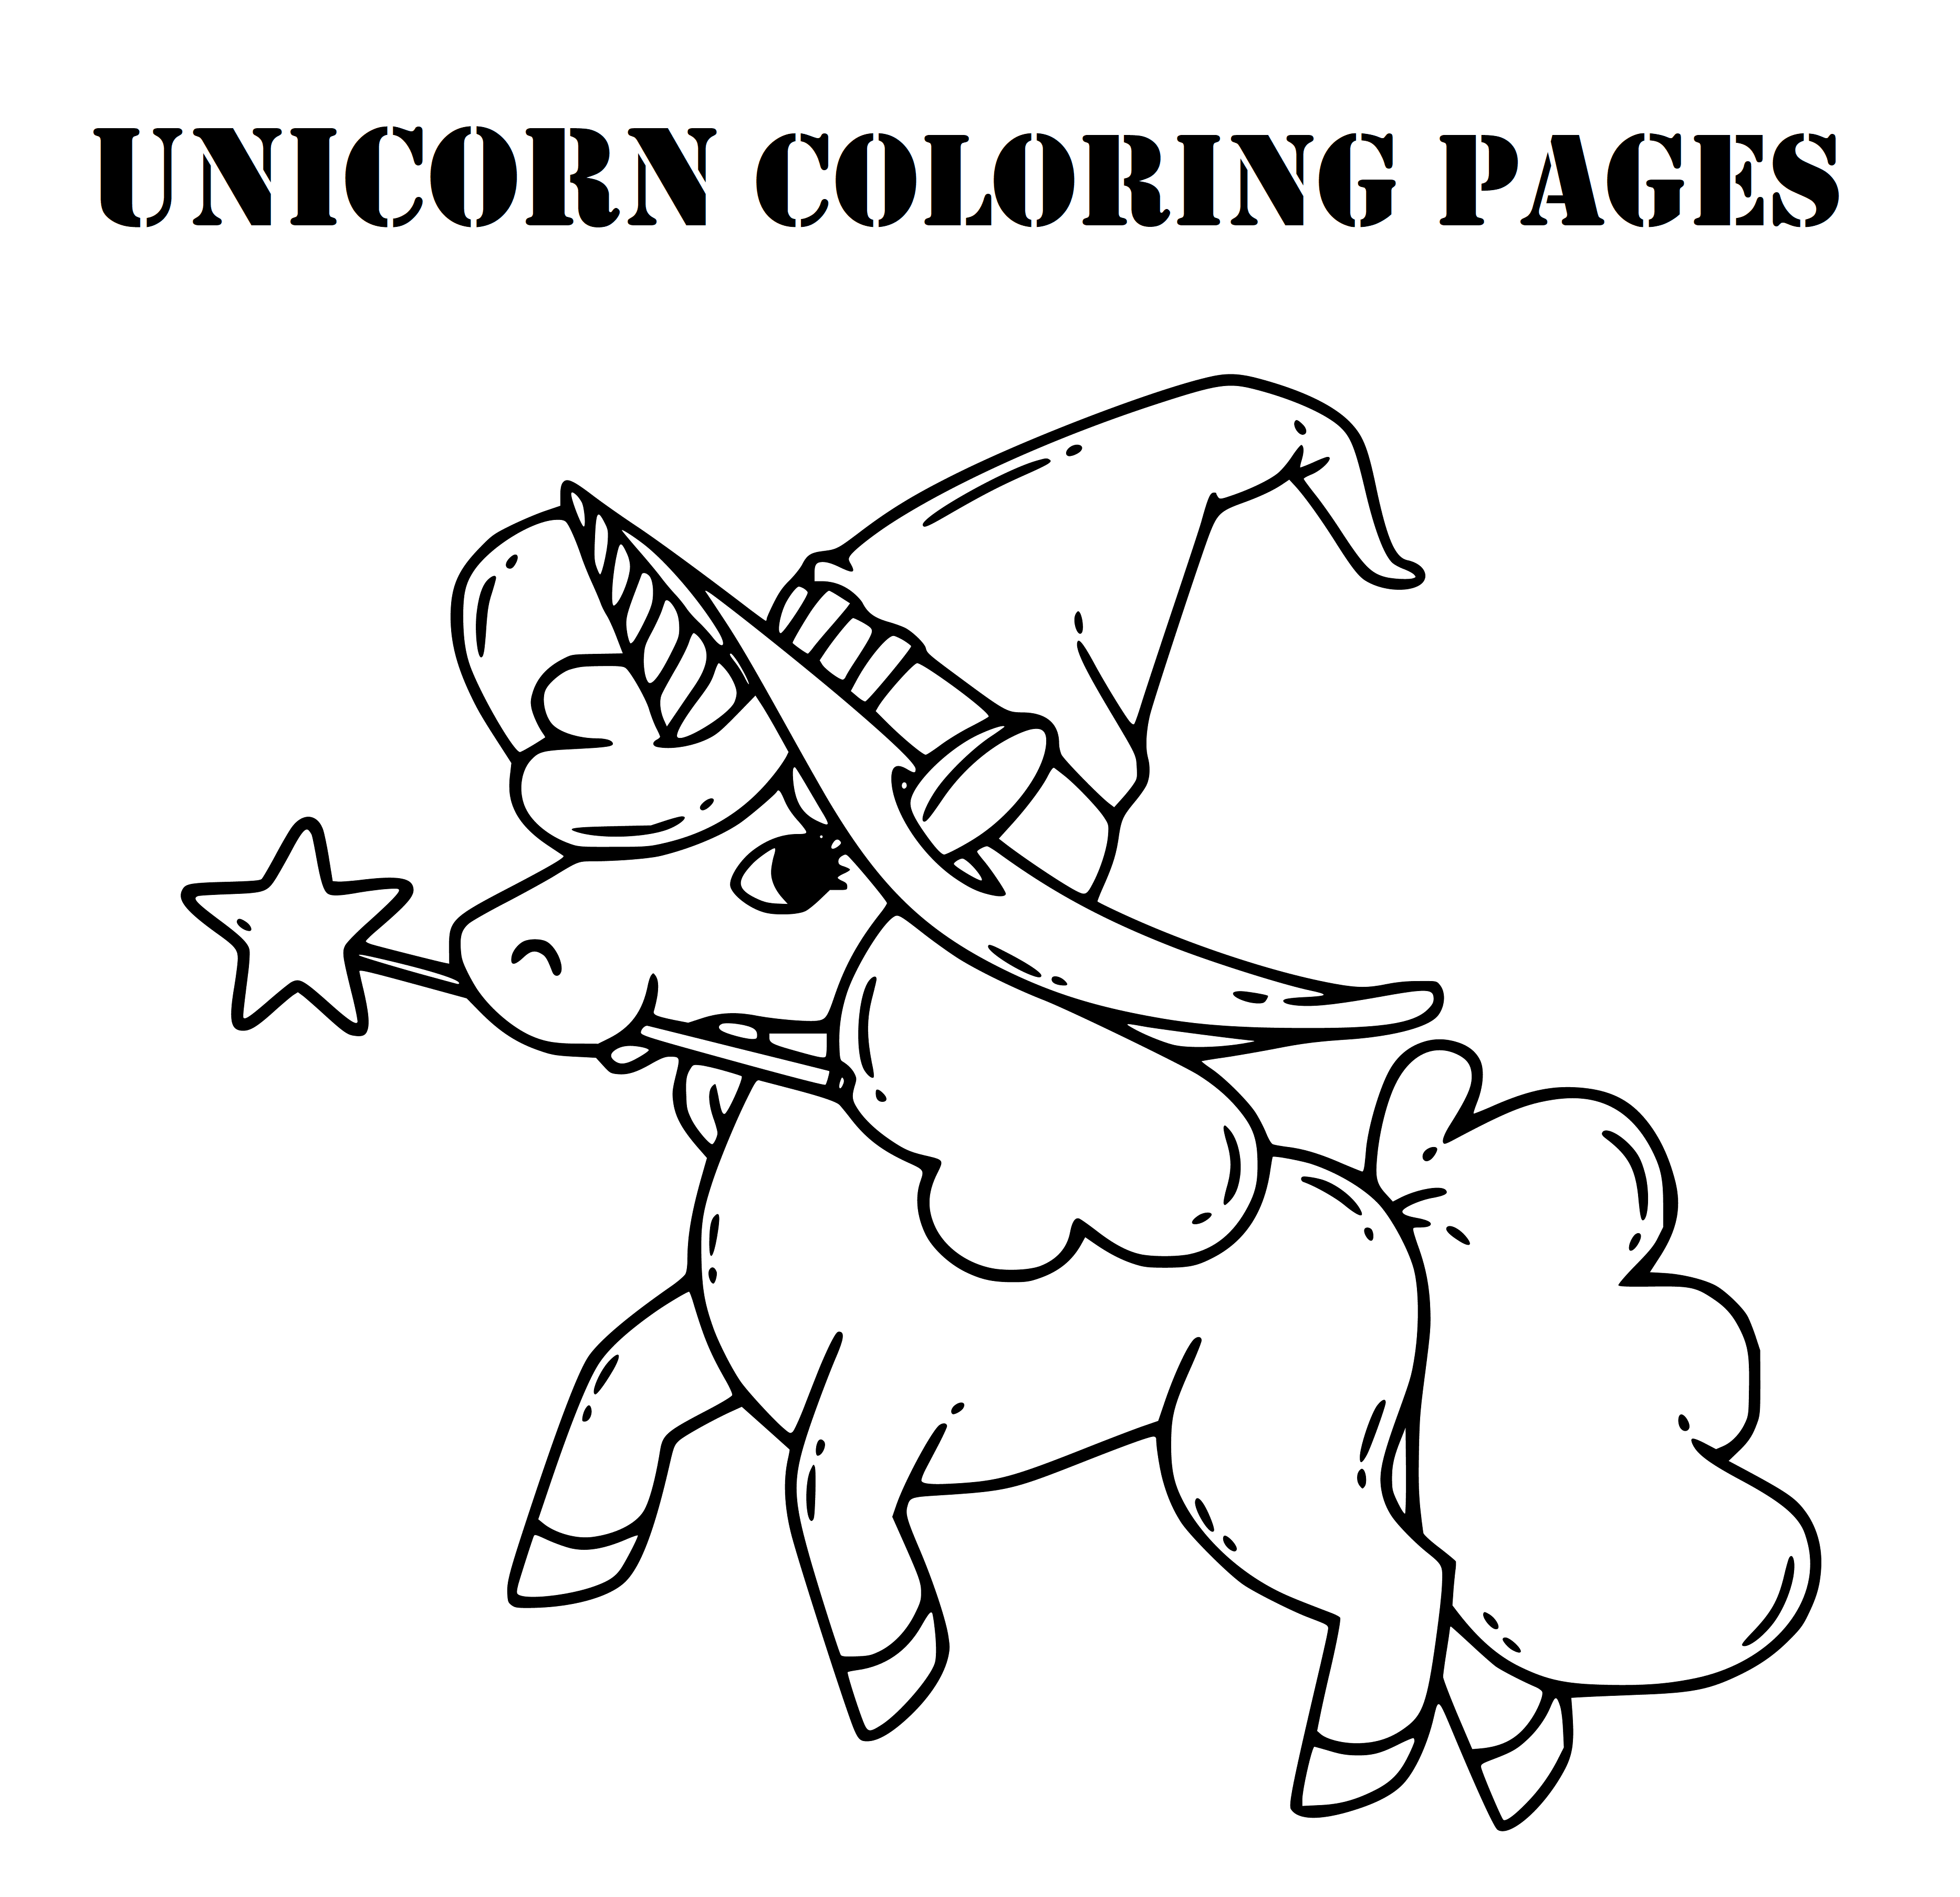 Printable Unicorn and Magic Wand Coloring Page for kids.